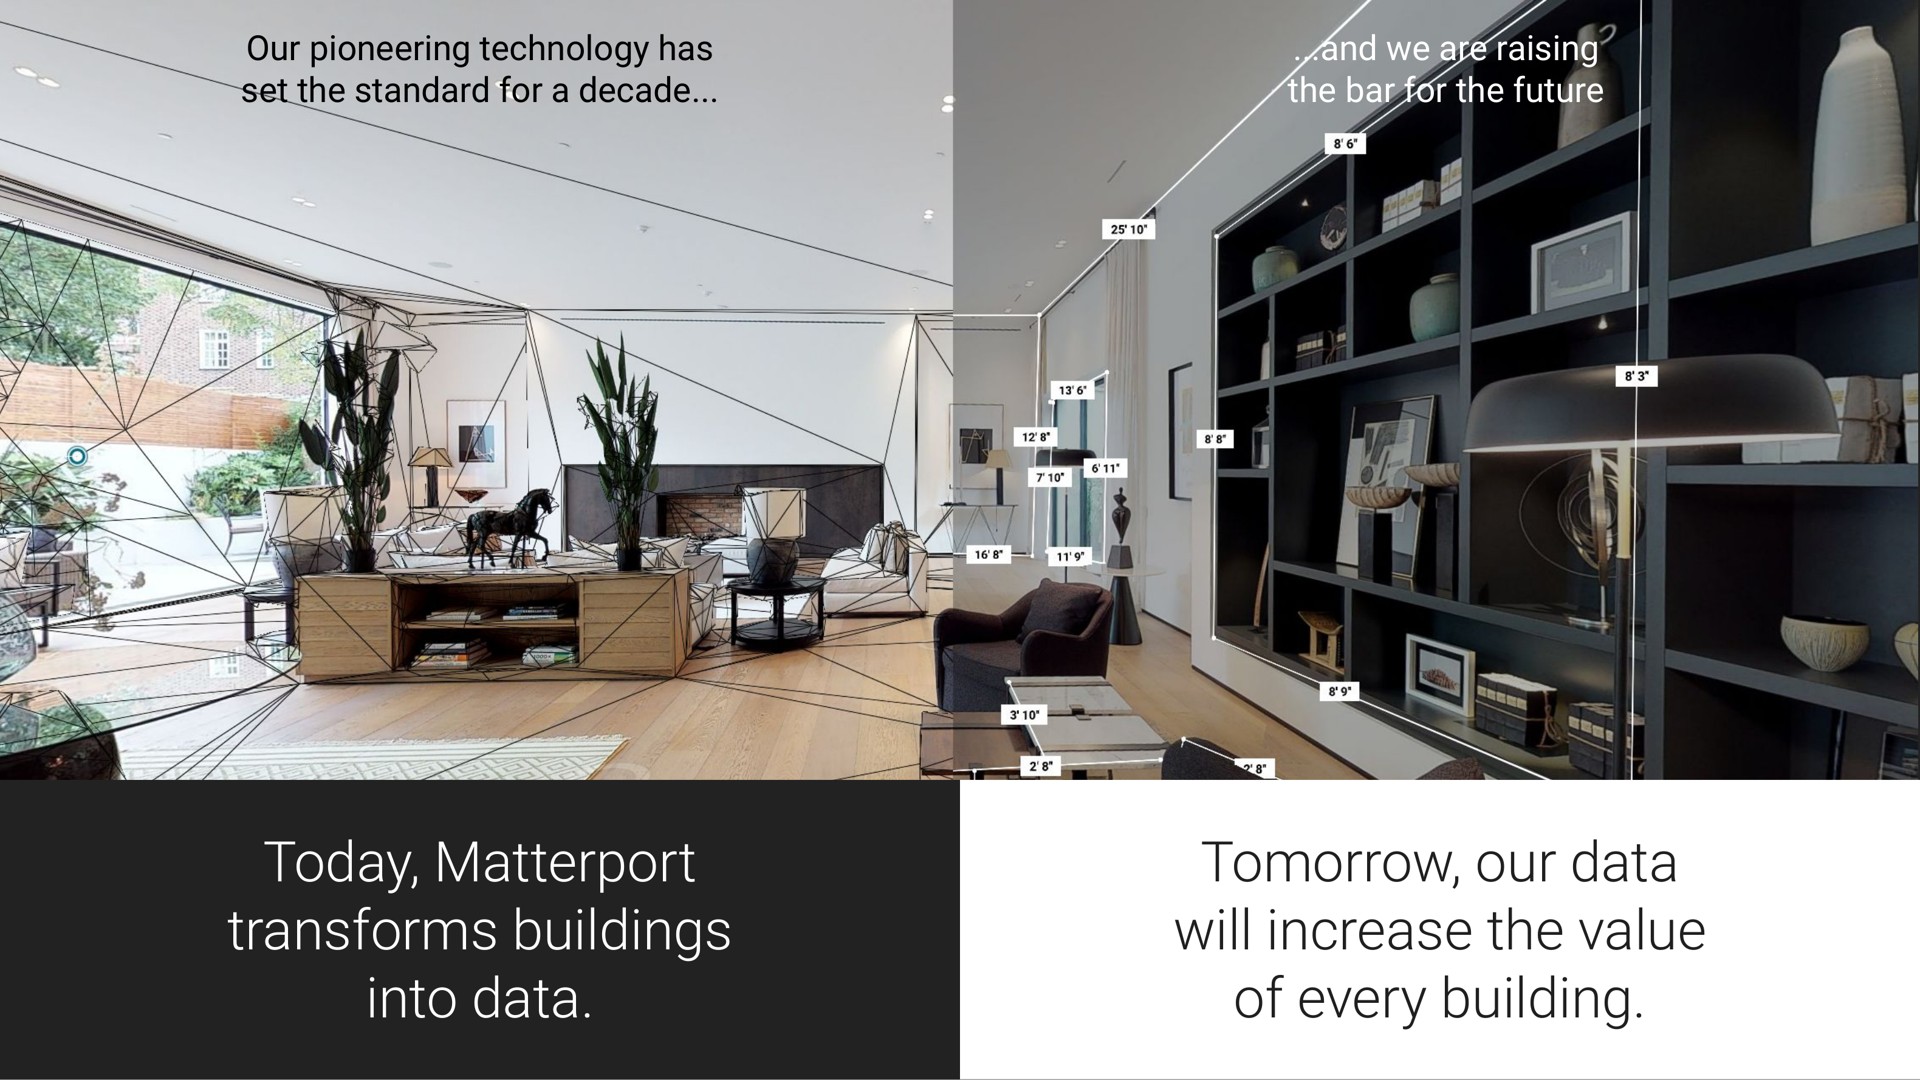 our pioneering technology has set the standard for a decade and we are raising the bar for the future today transforms buildings into data tomorrow our data will increase the value of every building dee | Matterport